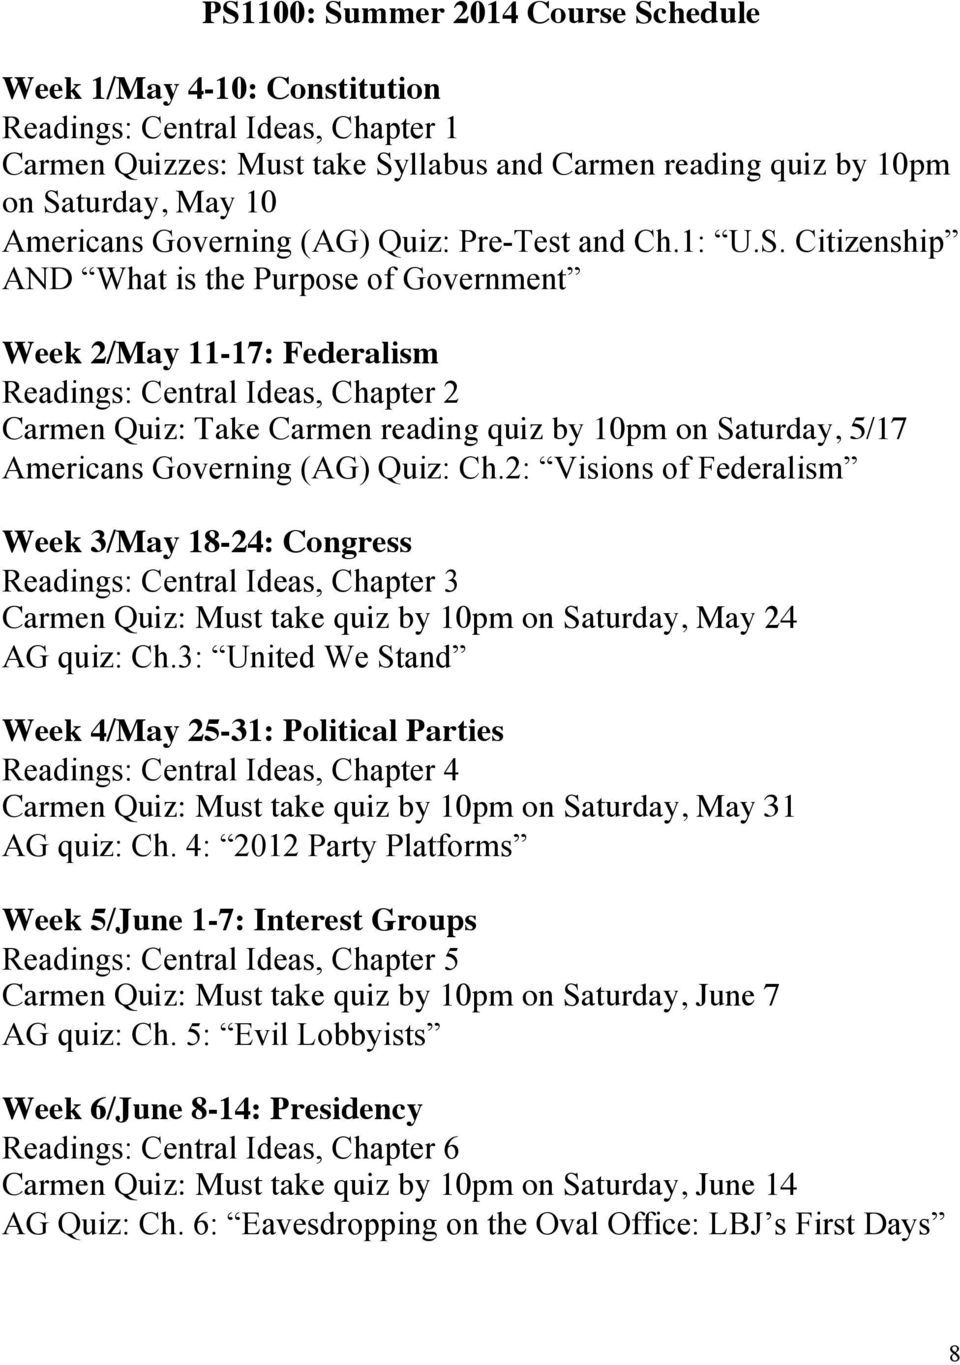 Citizenship AND What is the Purpose of Government Week 2/May 11-17: Federalism Readings: Central Ideas, Chapter 2 Carmen Quiz: Take Carmen reading quiz by 10pm on Saturday, 5/17 Americans Governing